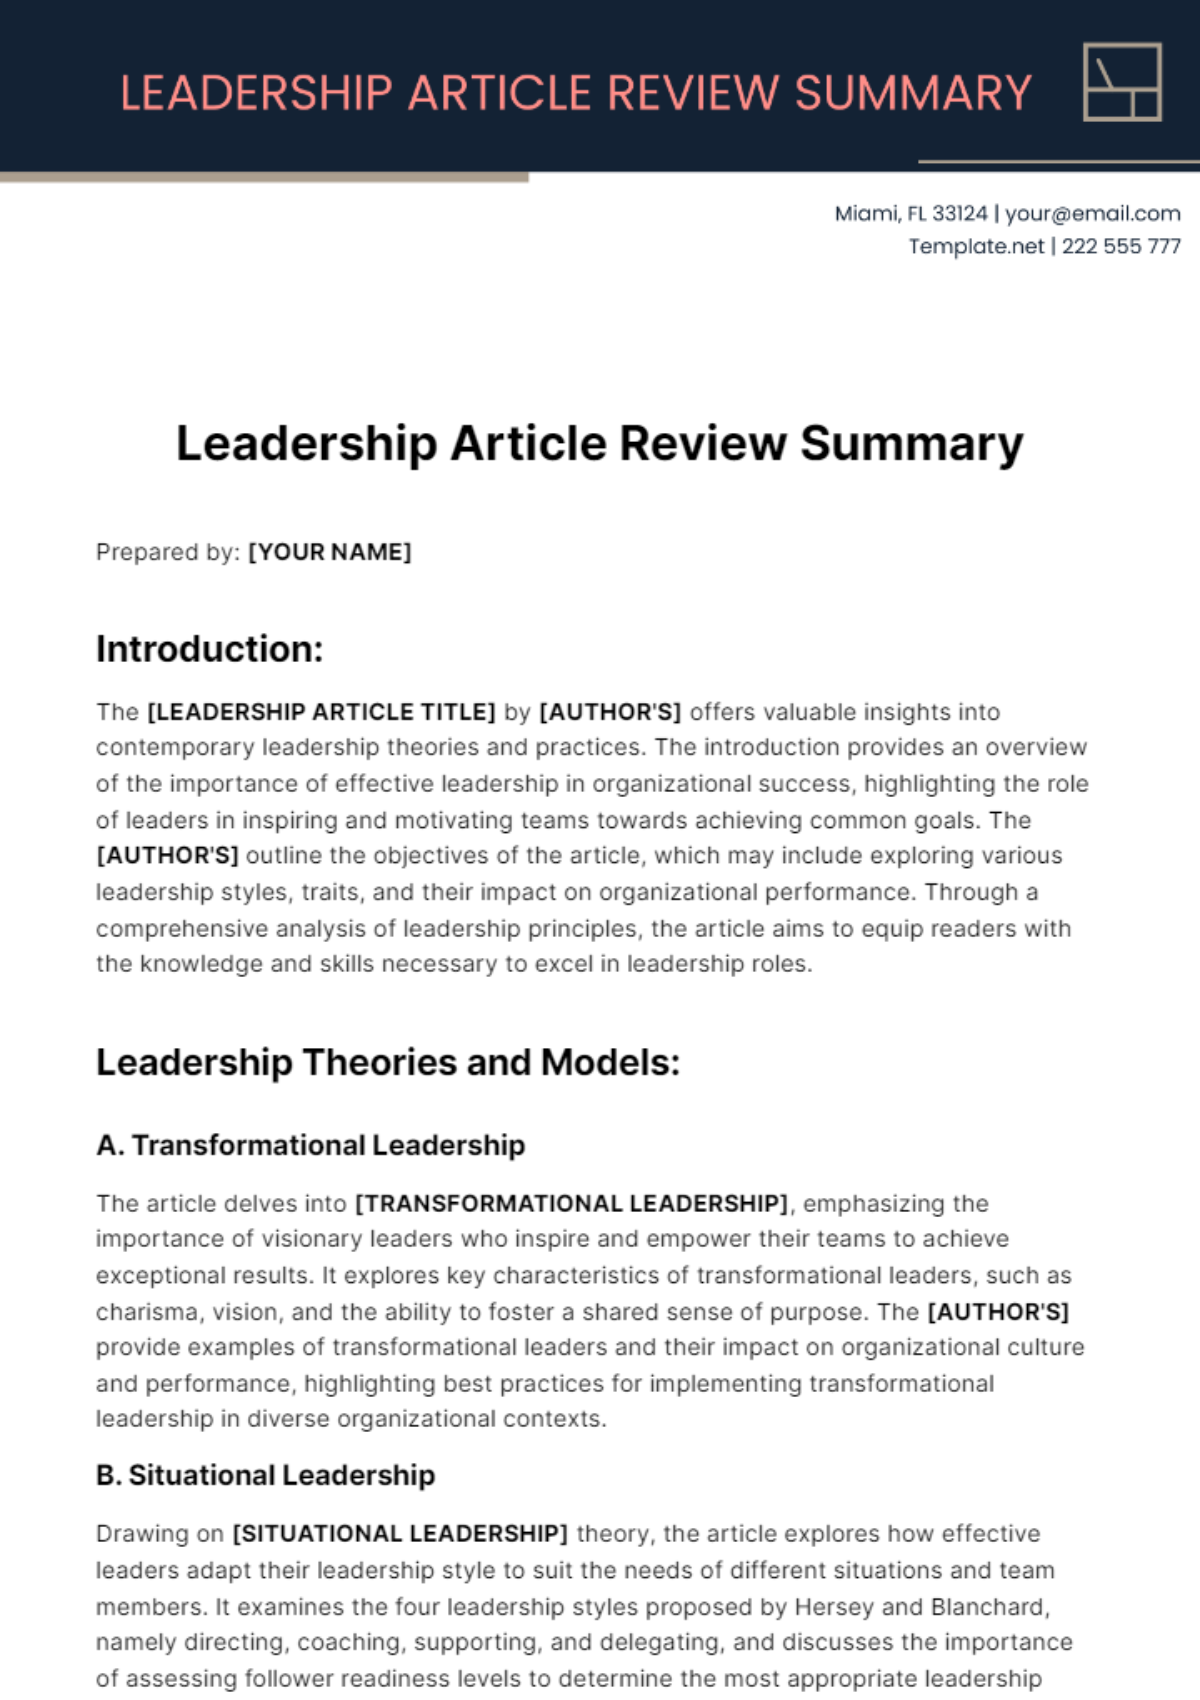 Leadership Article Review Summary